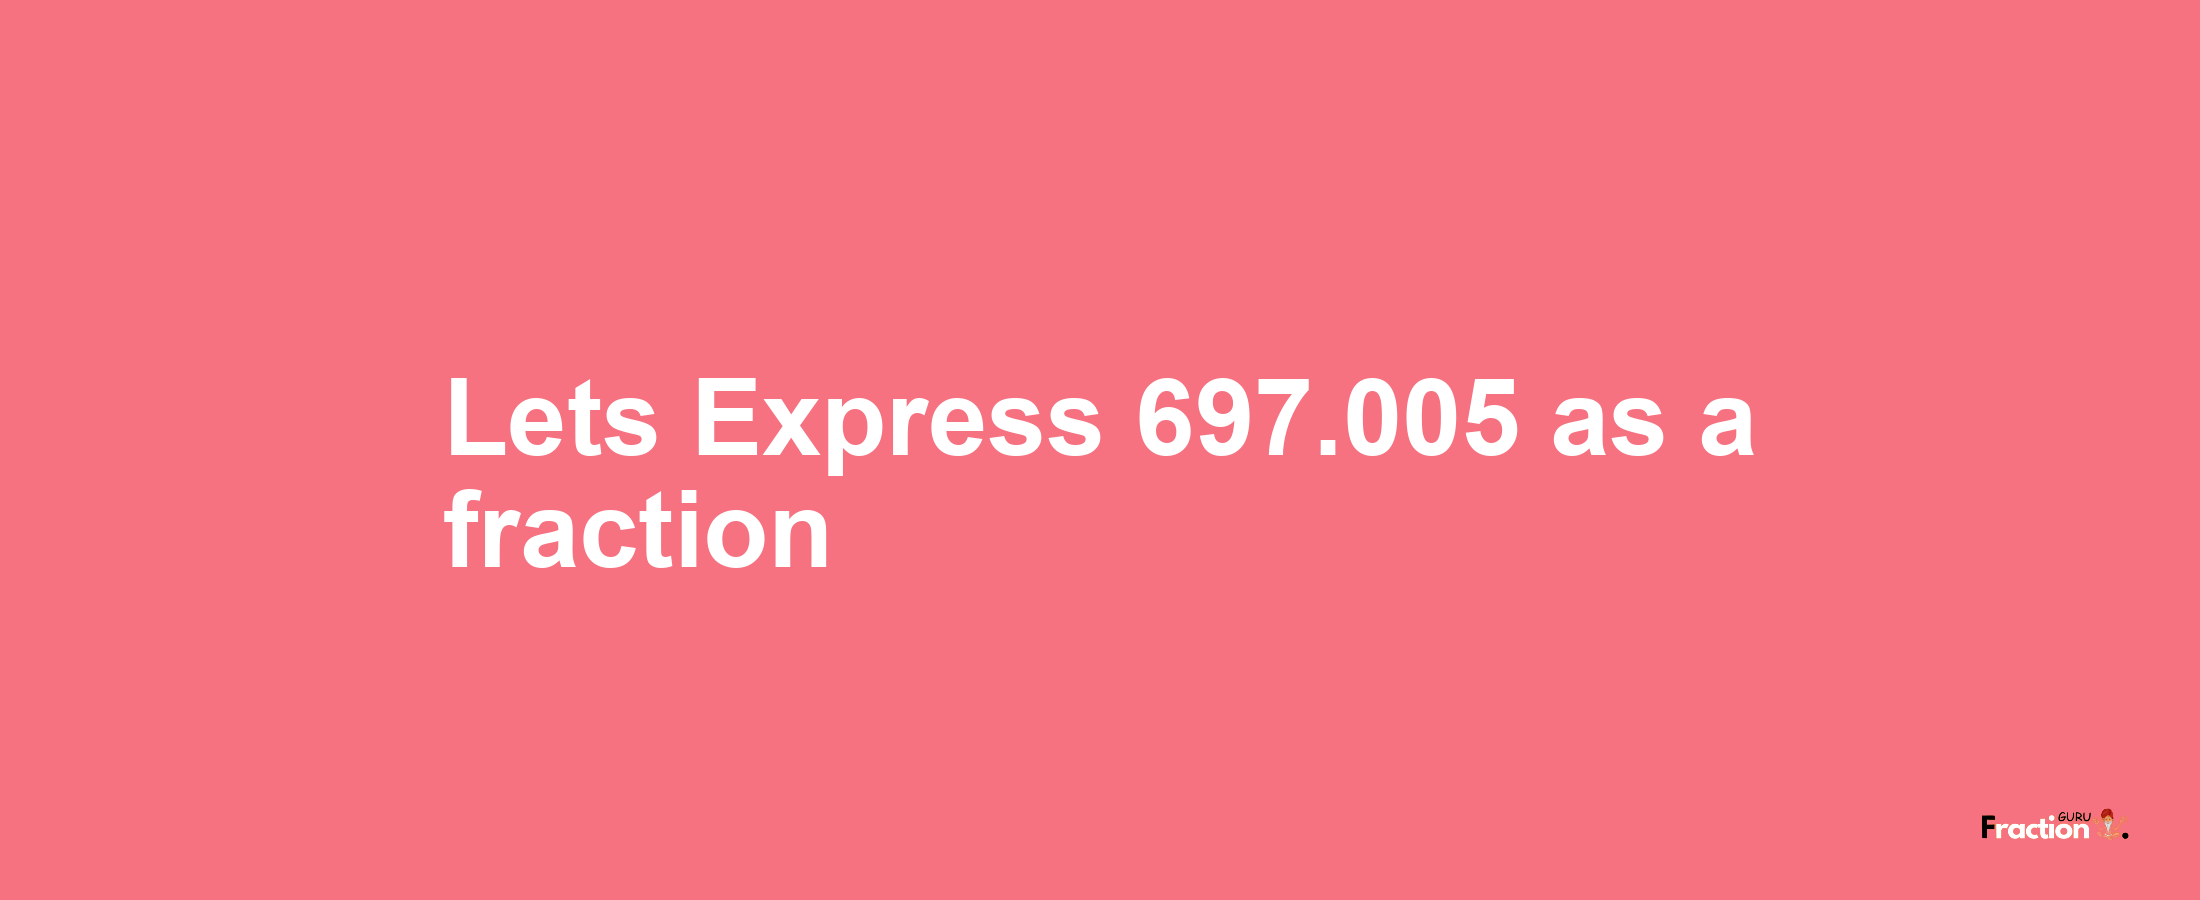 Lets Express 697.005 as afraction